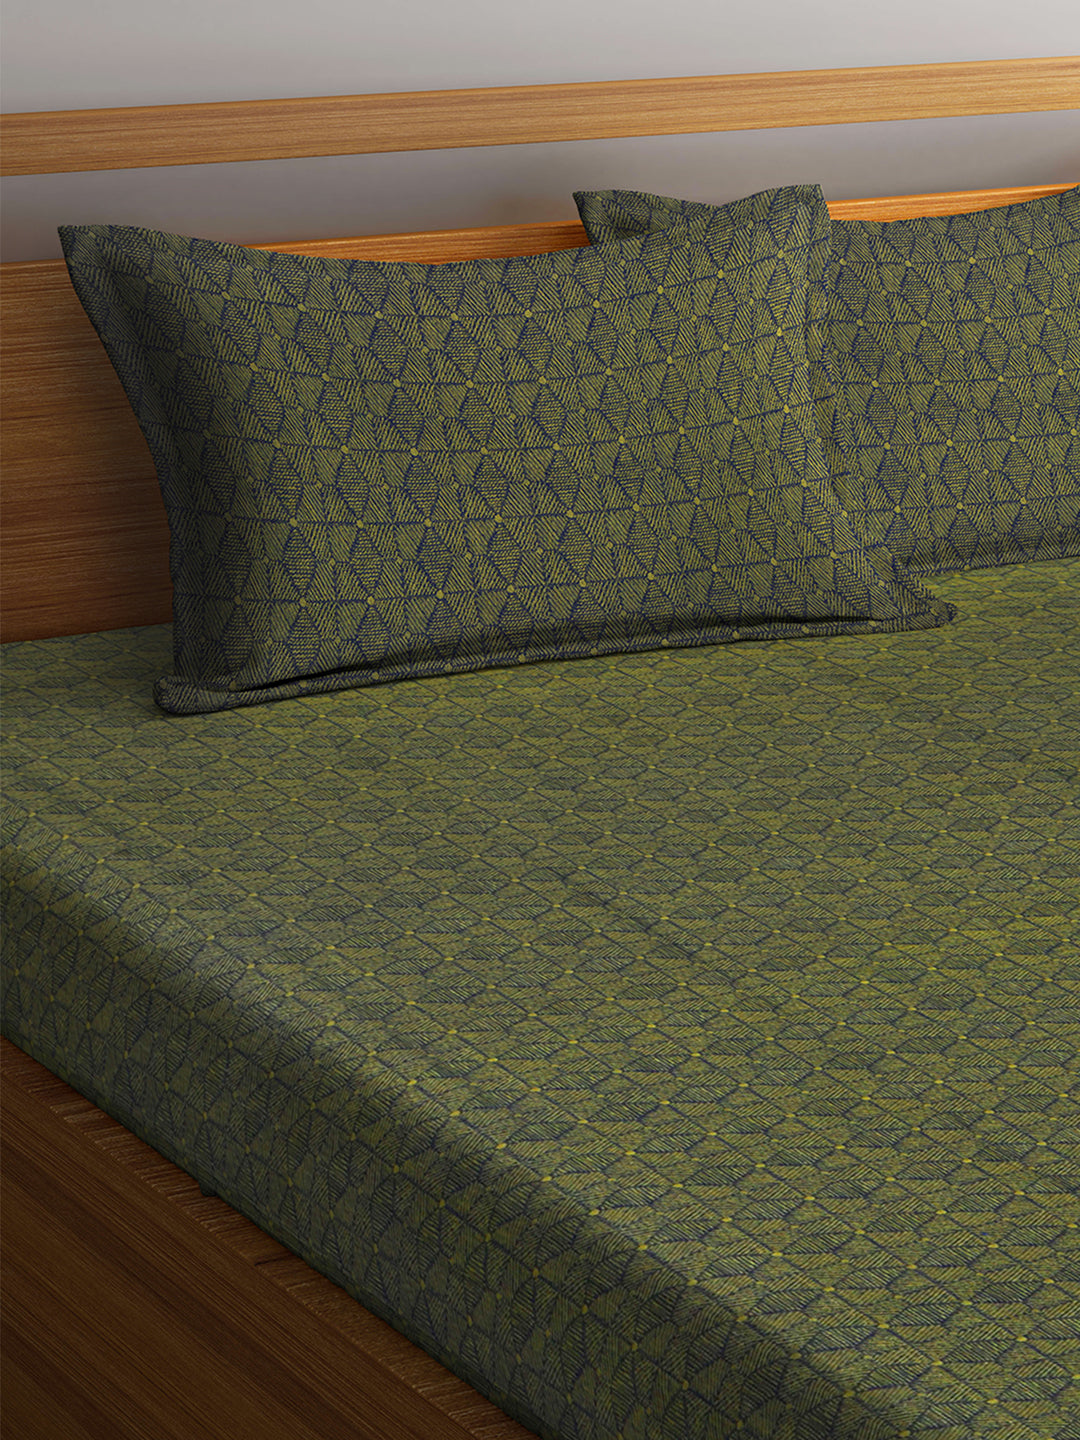 Arrabi Green Blocks Handwoven Cotton Double Size Bedsheet with 2 Pillow Covers (260 x 230 cm)